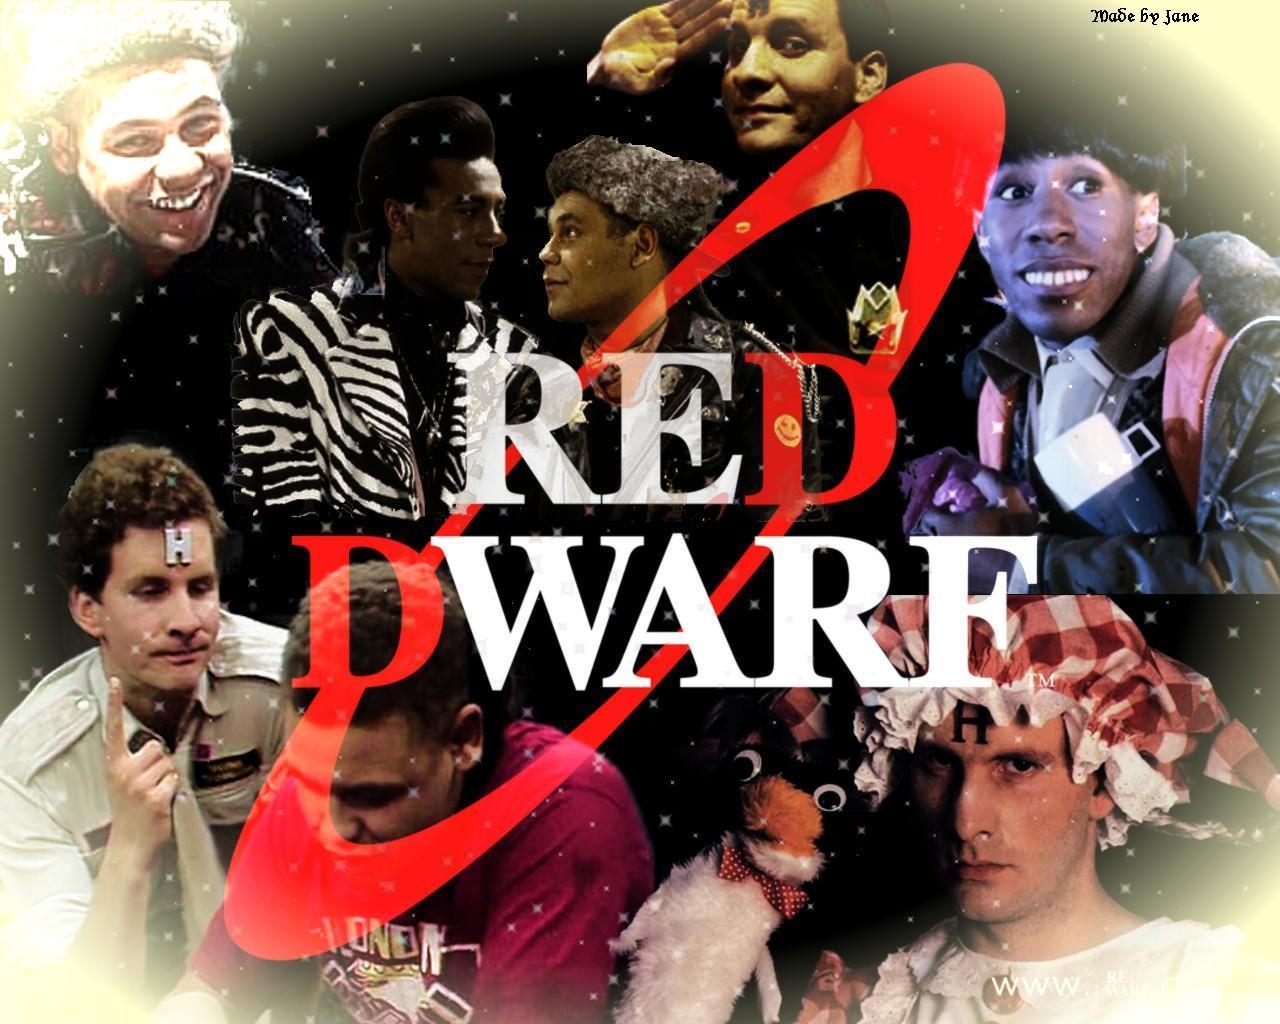 Red Dwarf Wallpaper. Daily inspiration art photo, picture